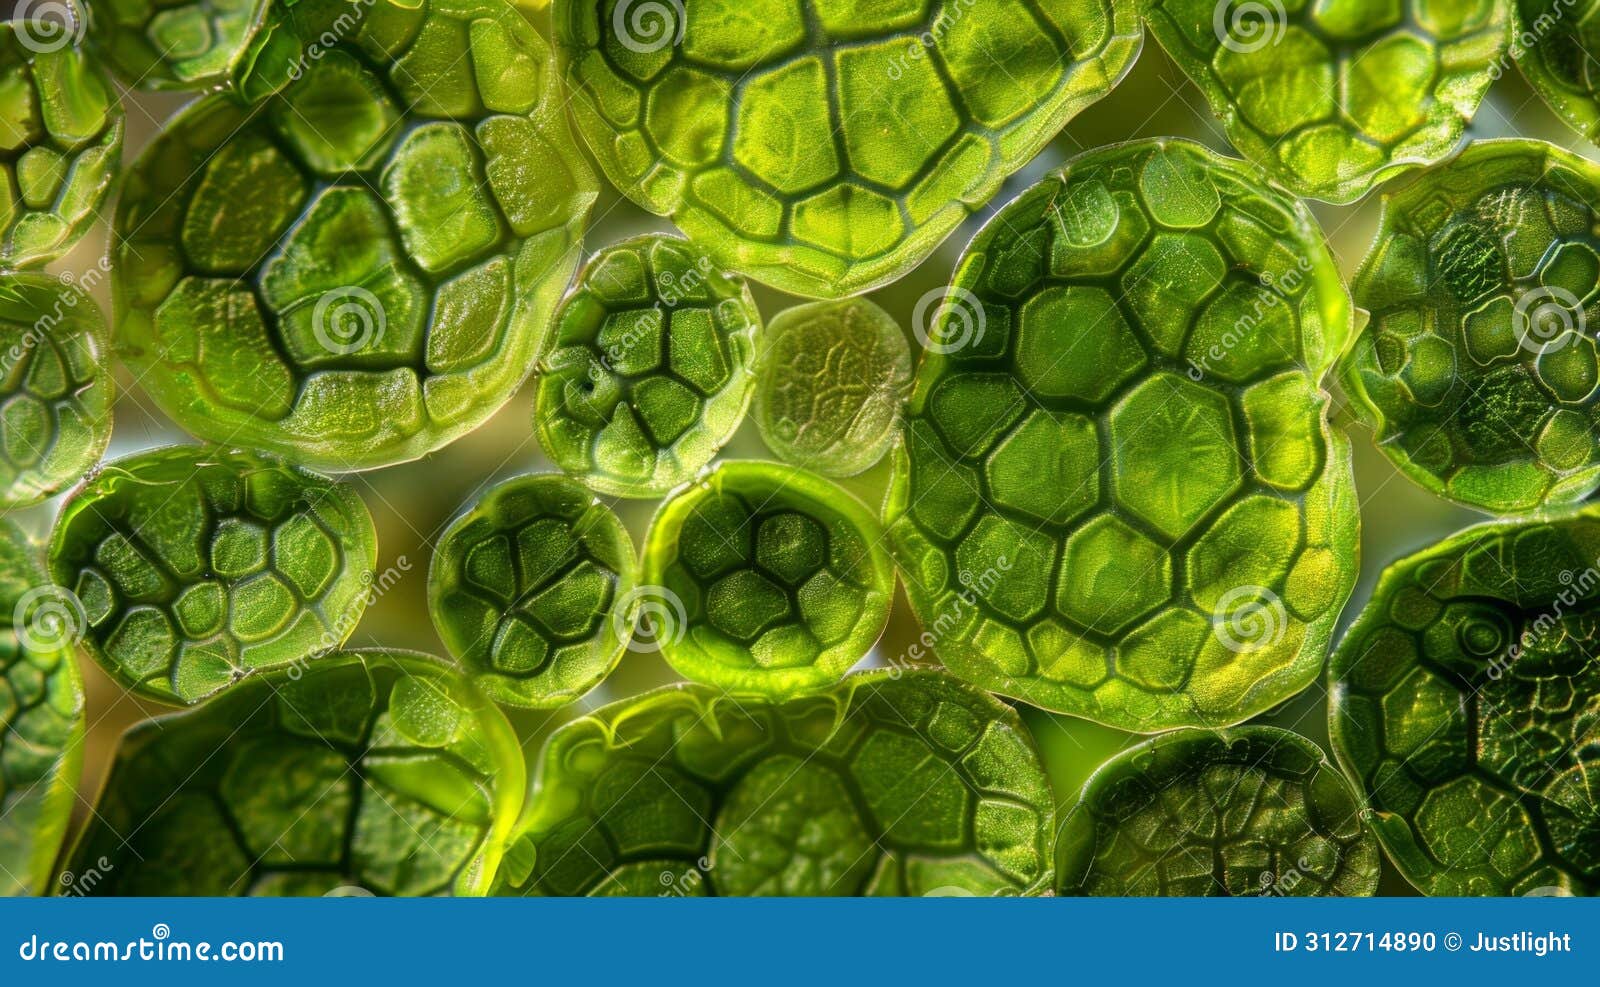 highresolution image of a of chloroplasts each containing a dense concentration of tiny circular structures known as